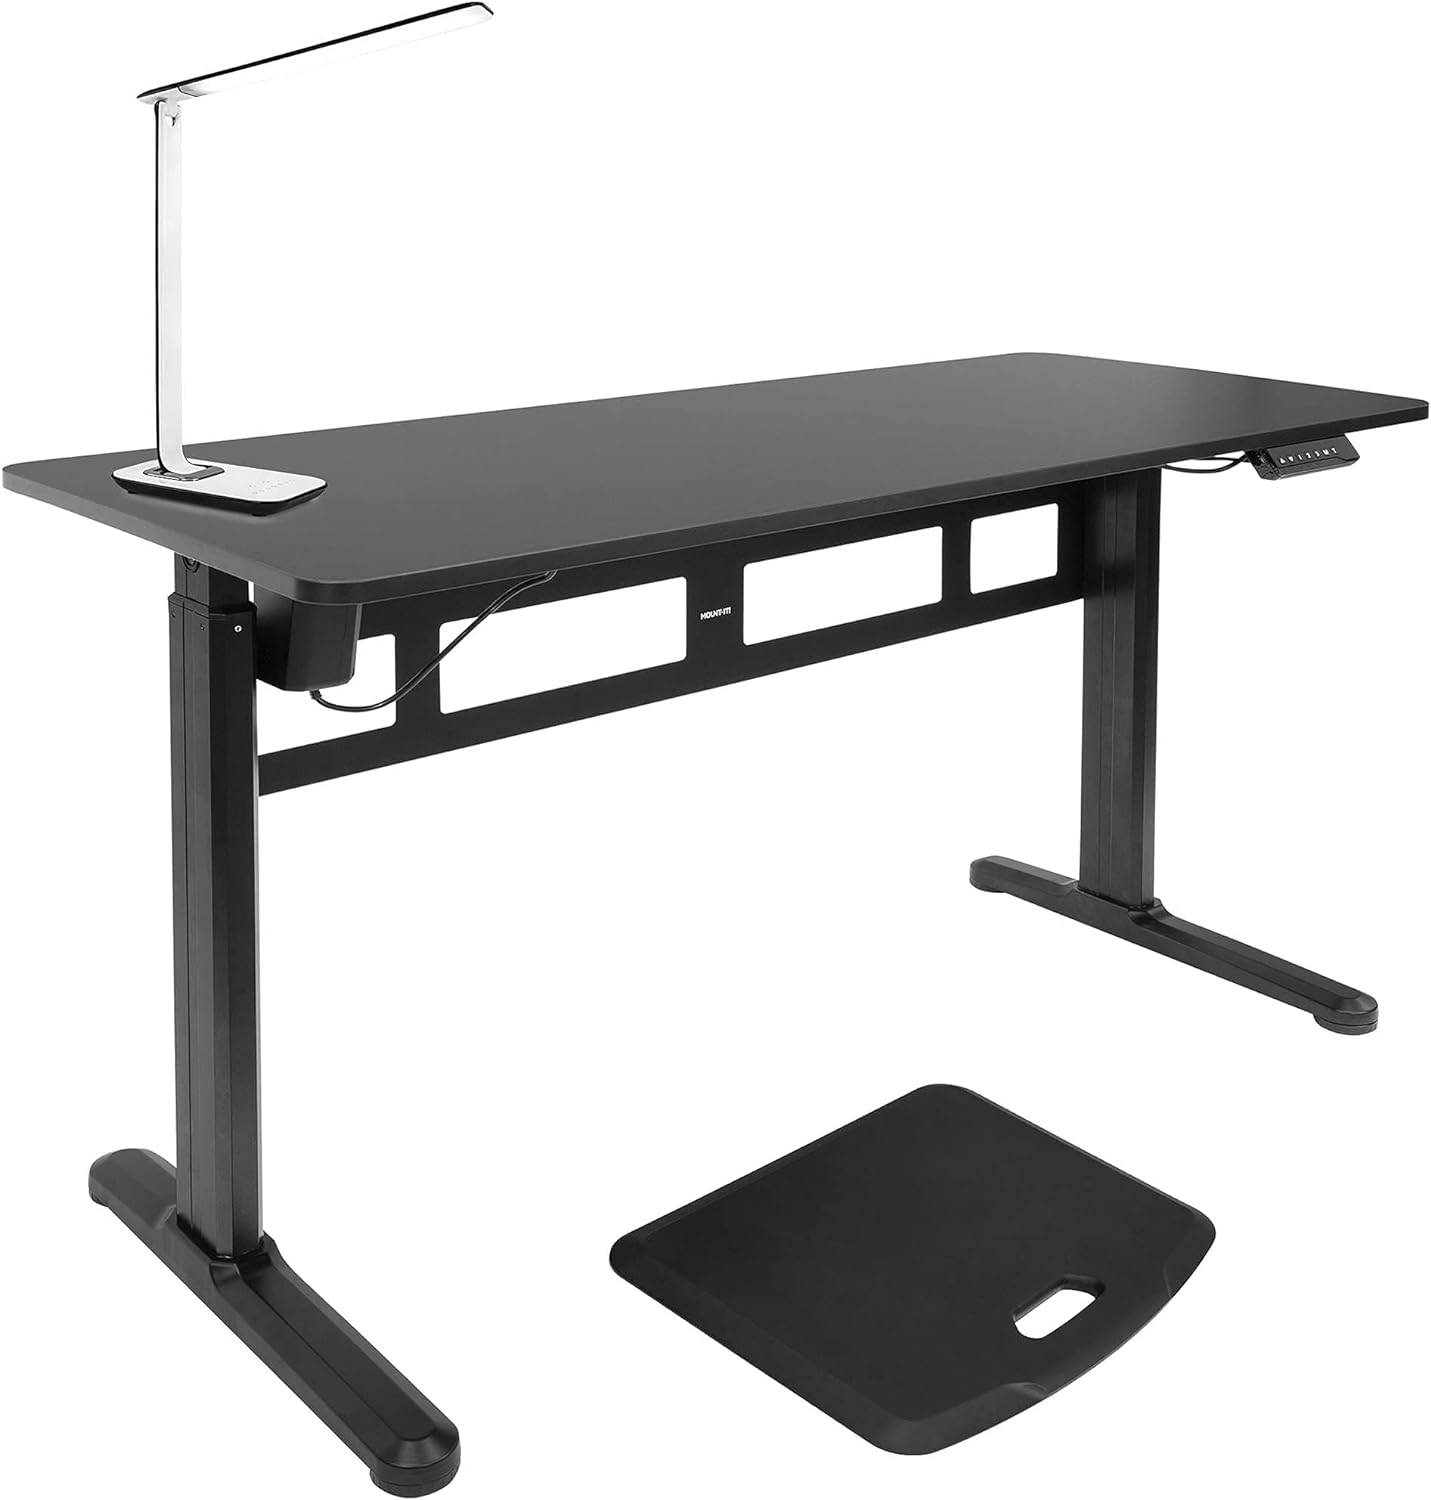 Electric Standing Desk [55.1" X 23.6"] Memory Control Panel - Adjustable Tabletop - Turcom LED Desk Lamp with USB Charging Port and anti Fatigue Floor Mat